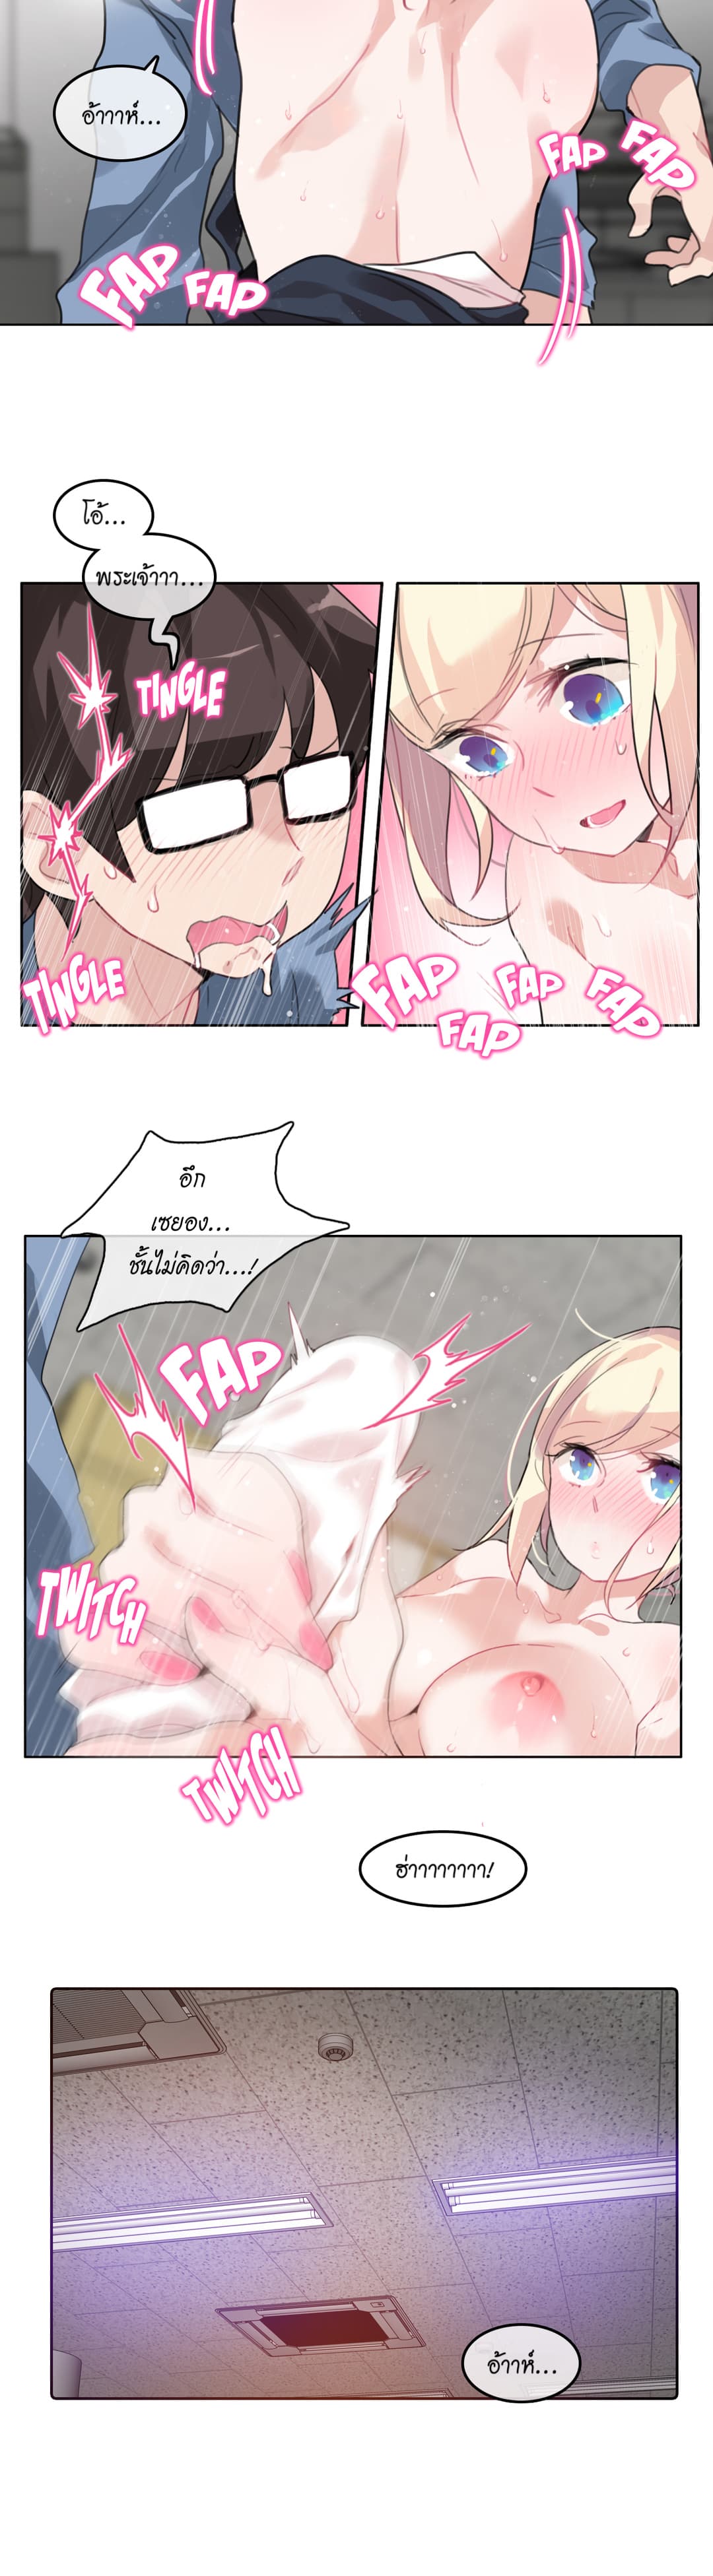 A Pervert’s Daily Life 25 (12)